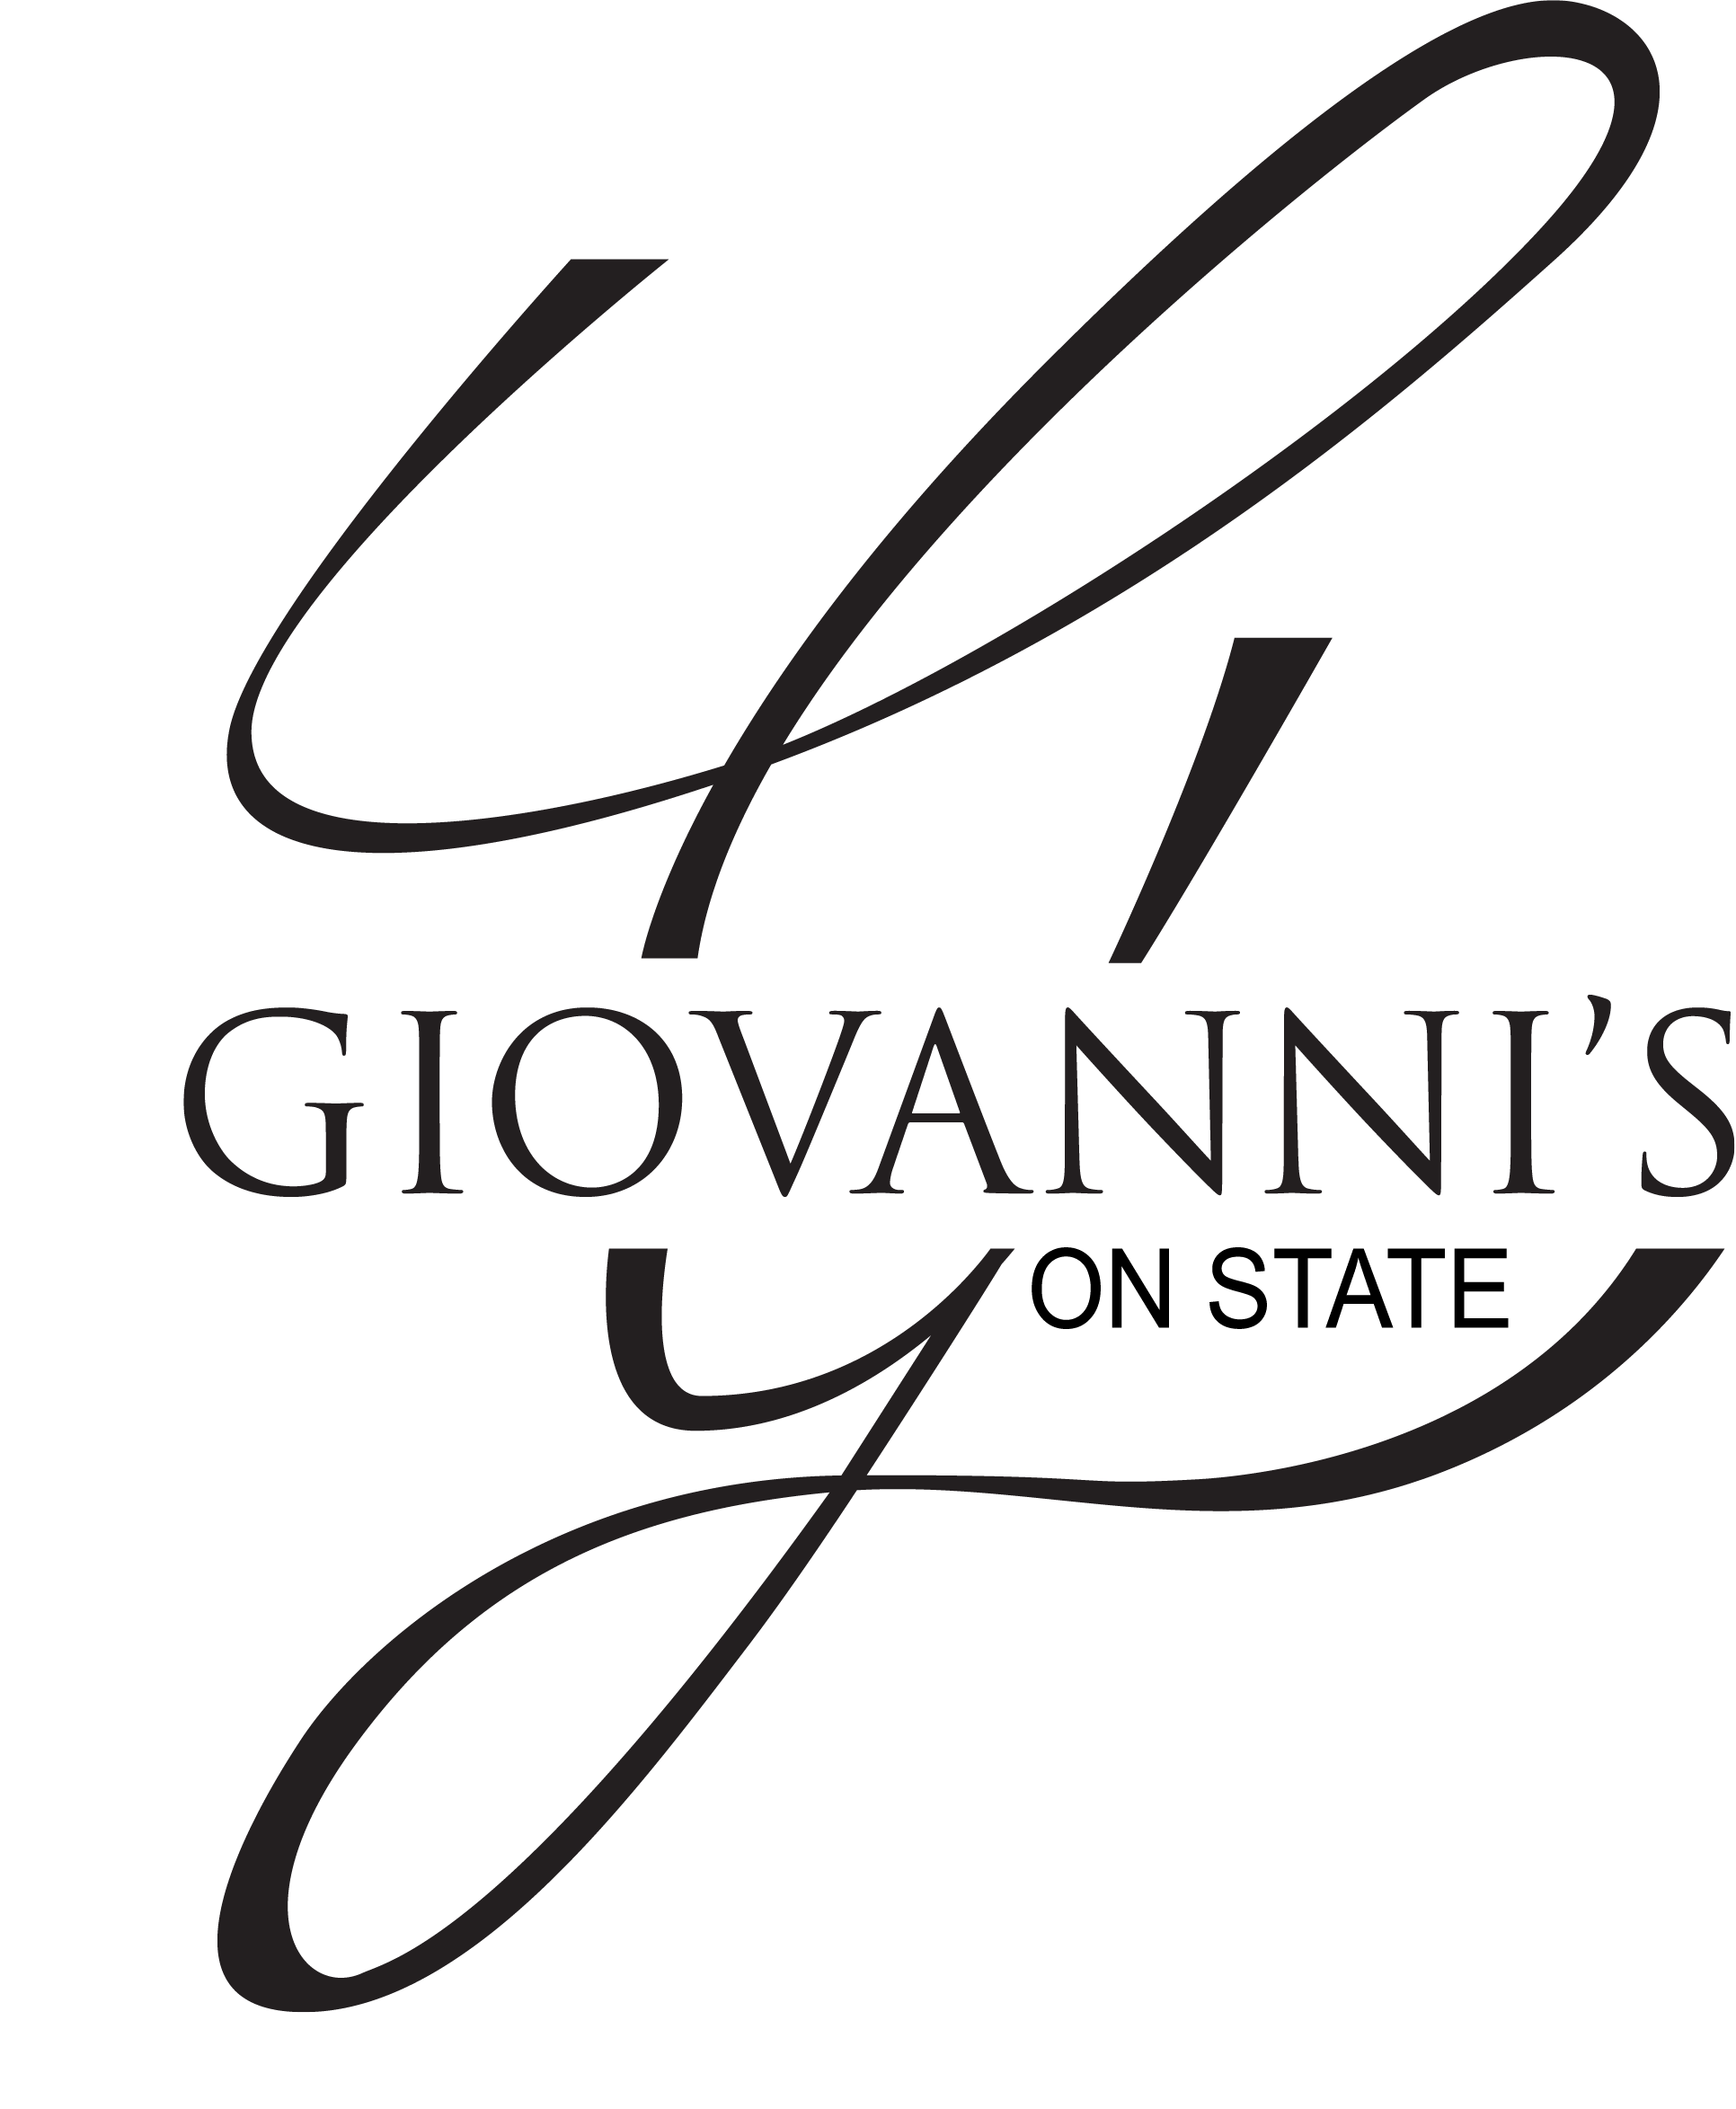 Giovanni's on state logo.